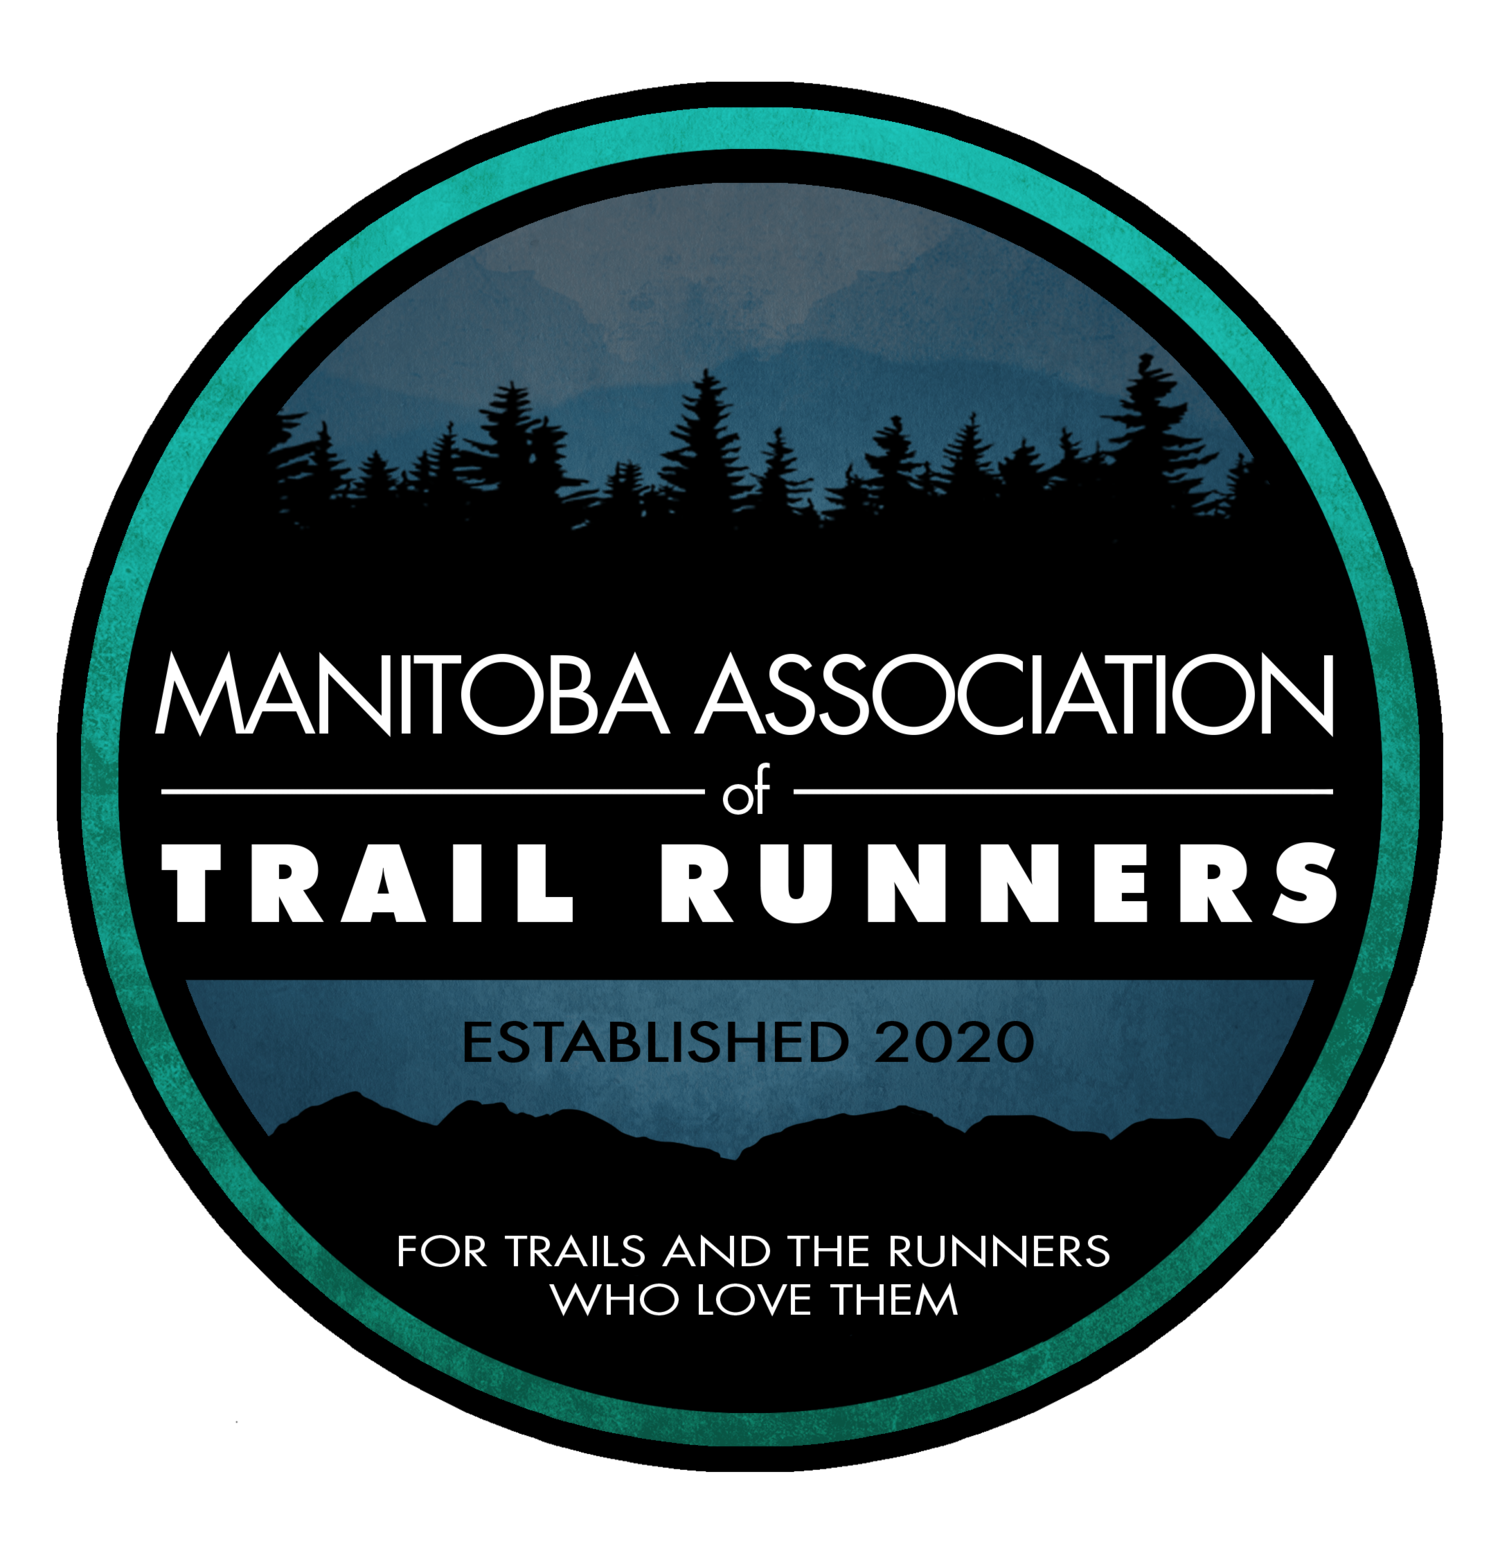 Manitoba Association of Trail Runners